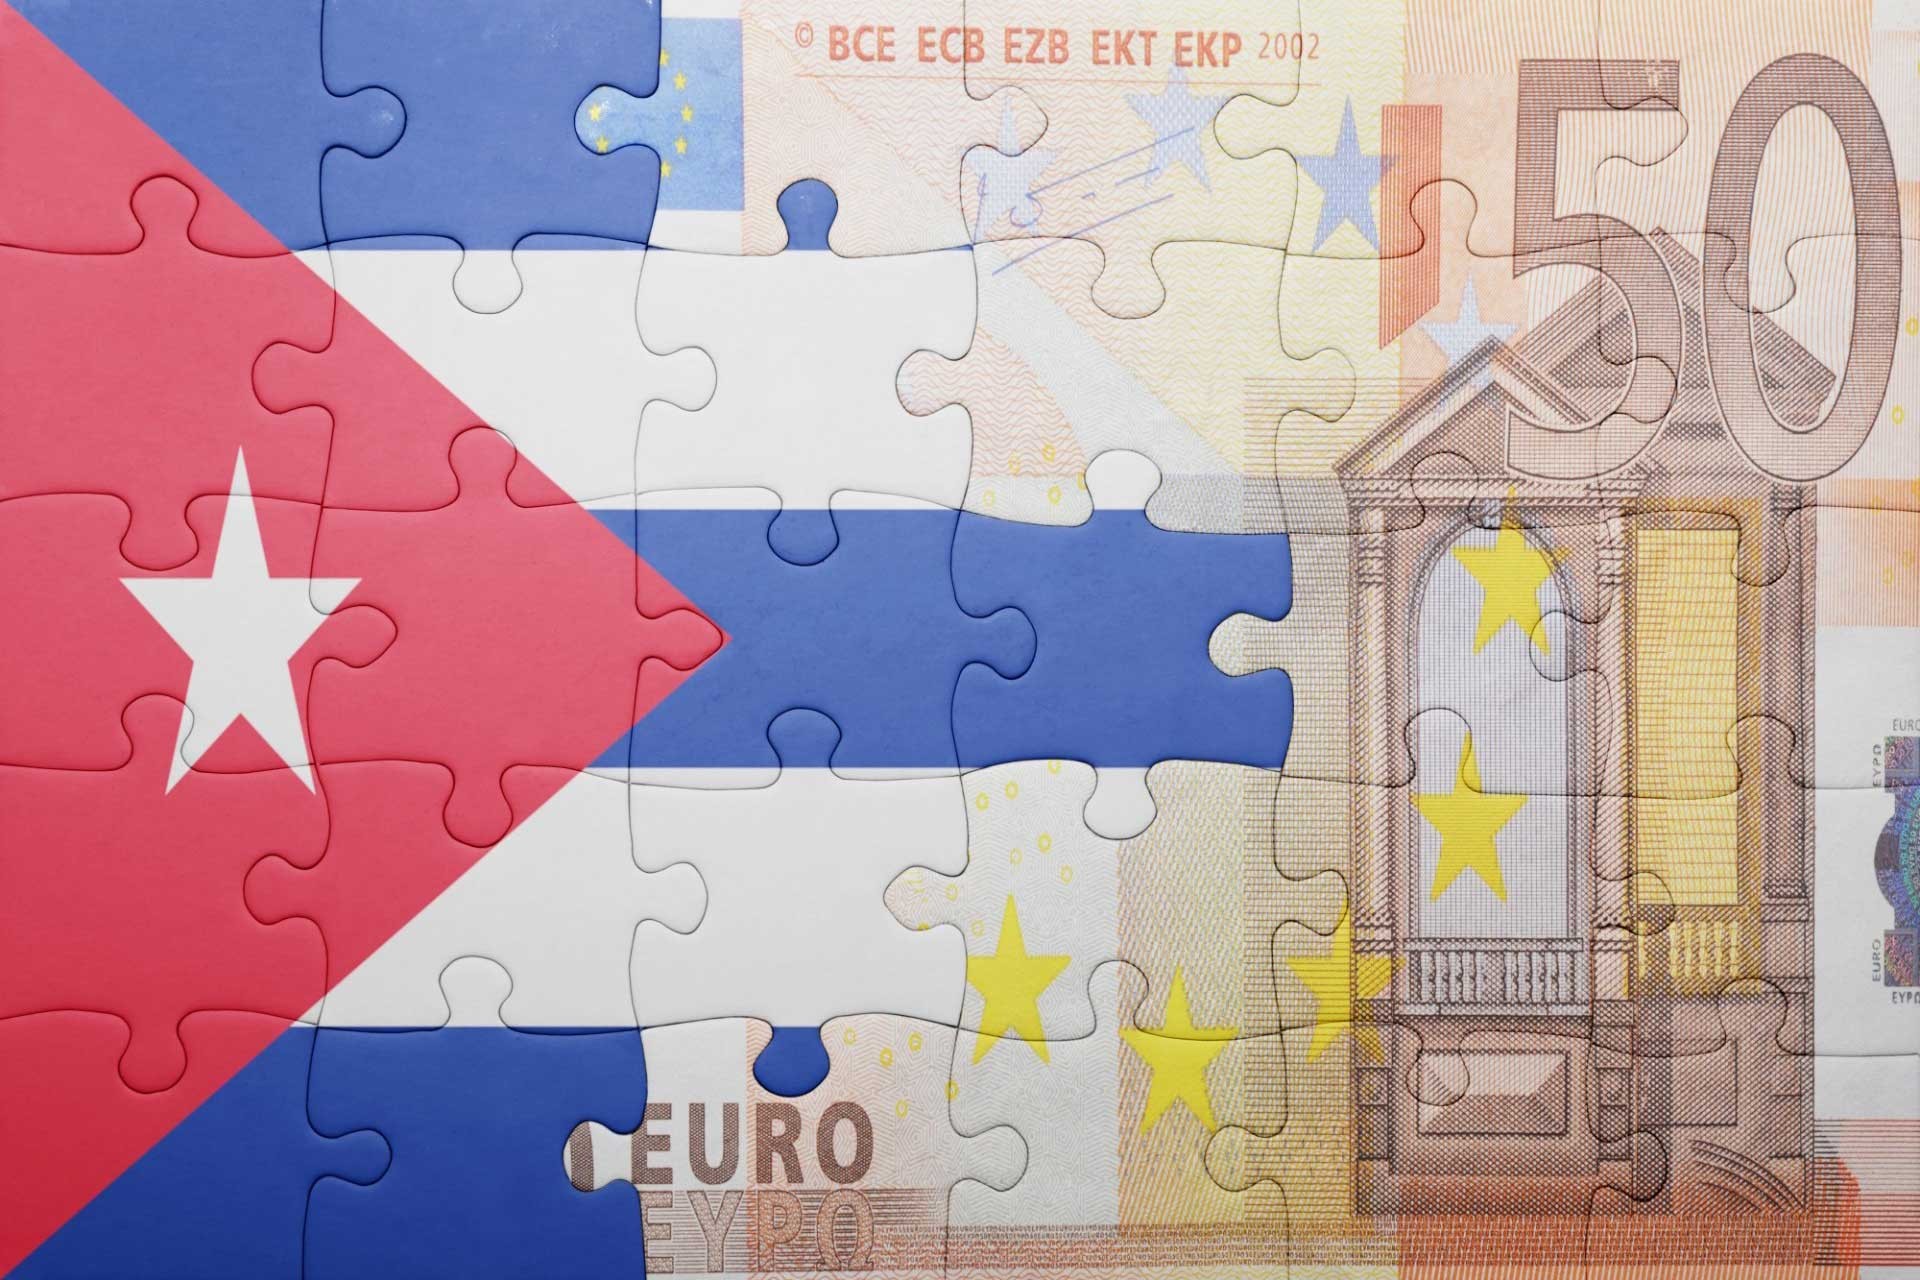 
puzzle with cuban flag superimposed over and bill of the European Union (EU)
